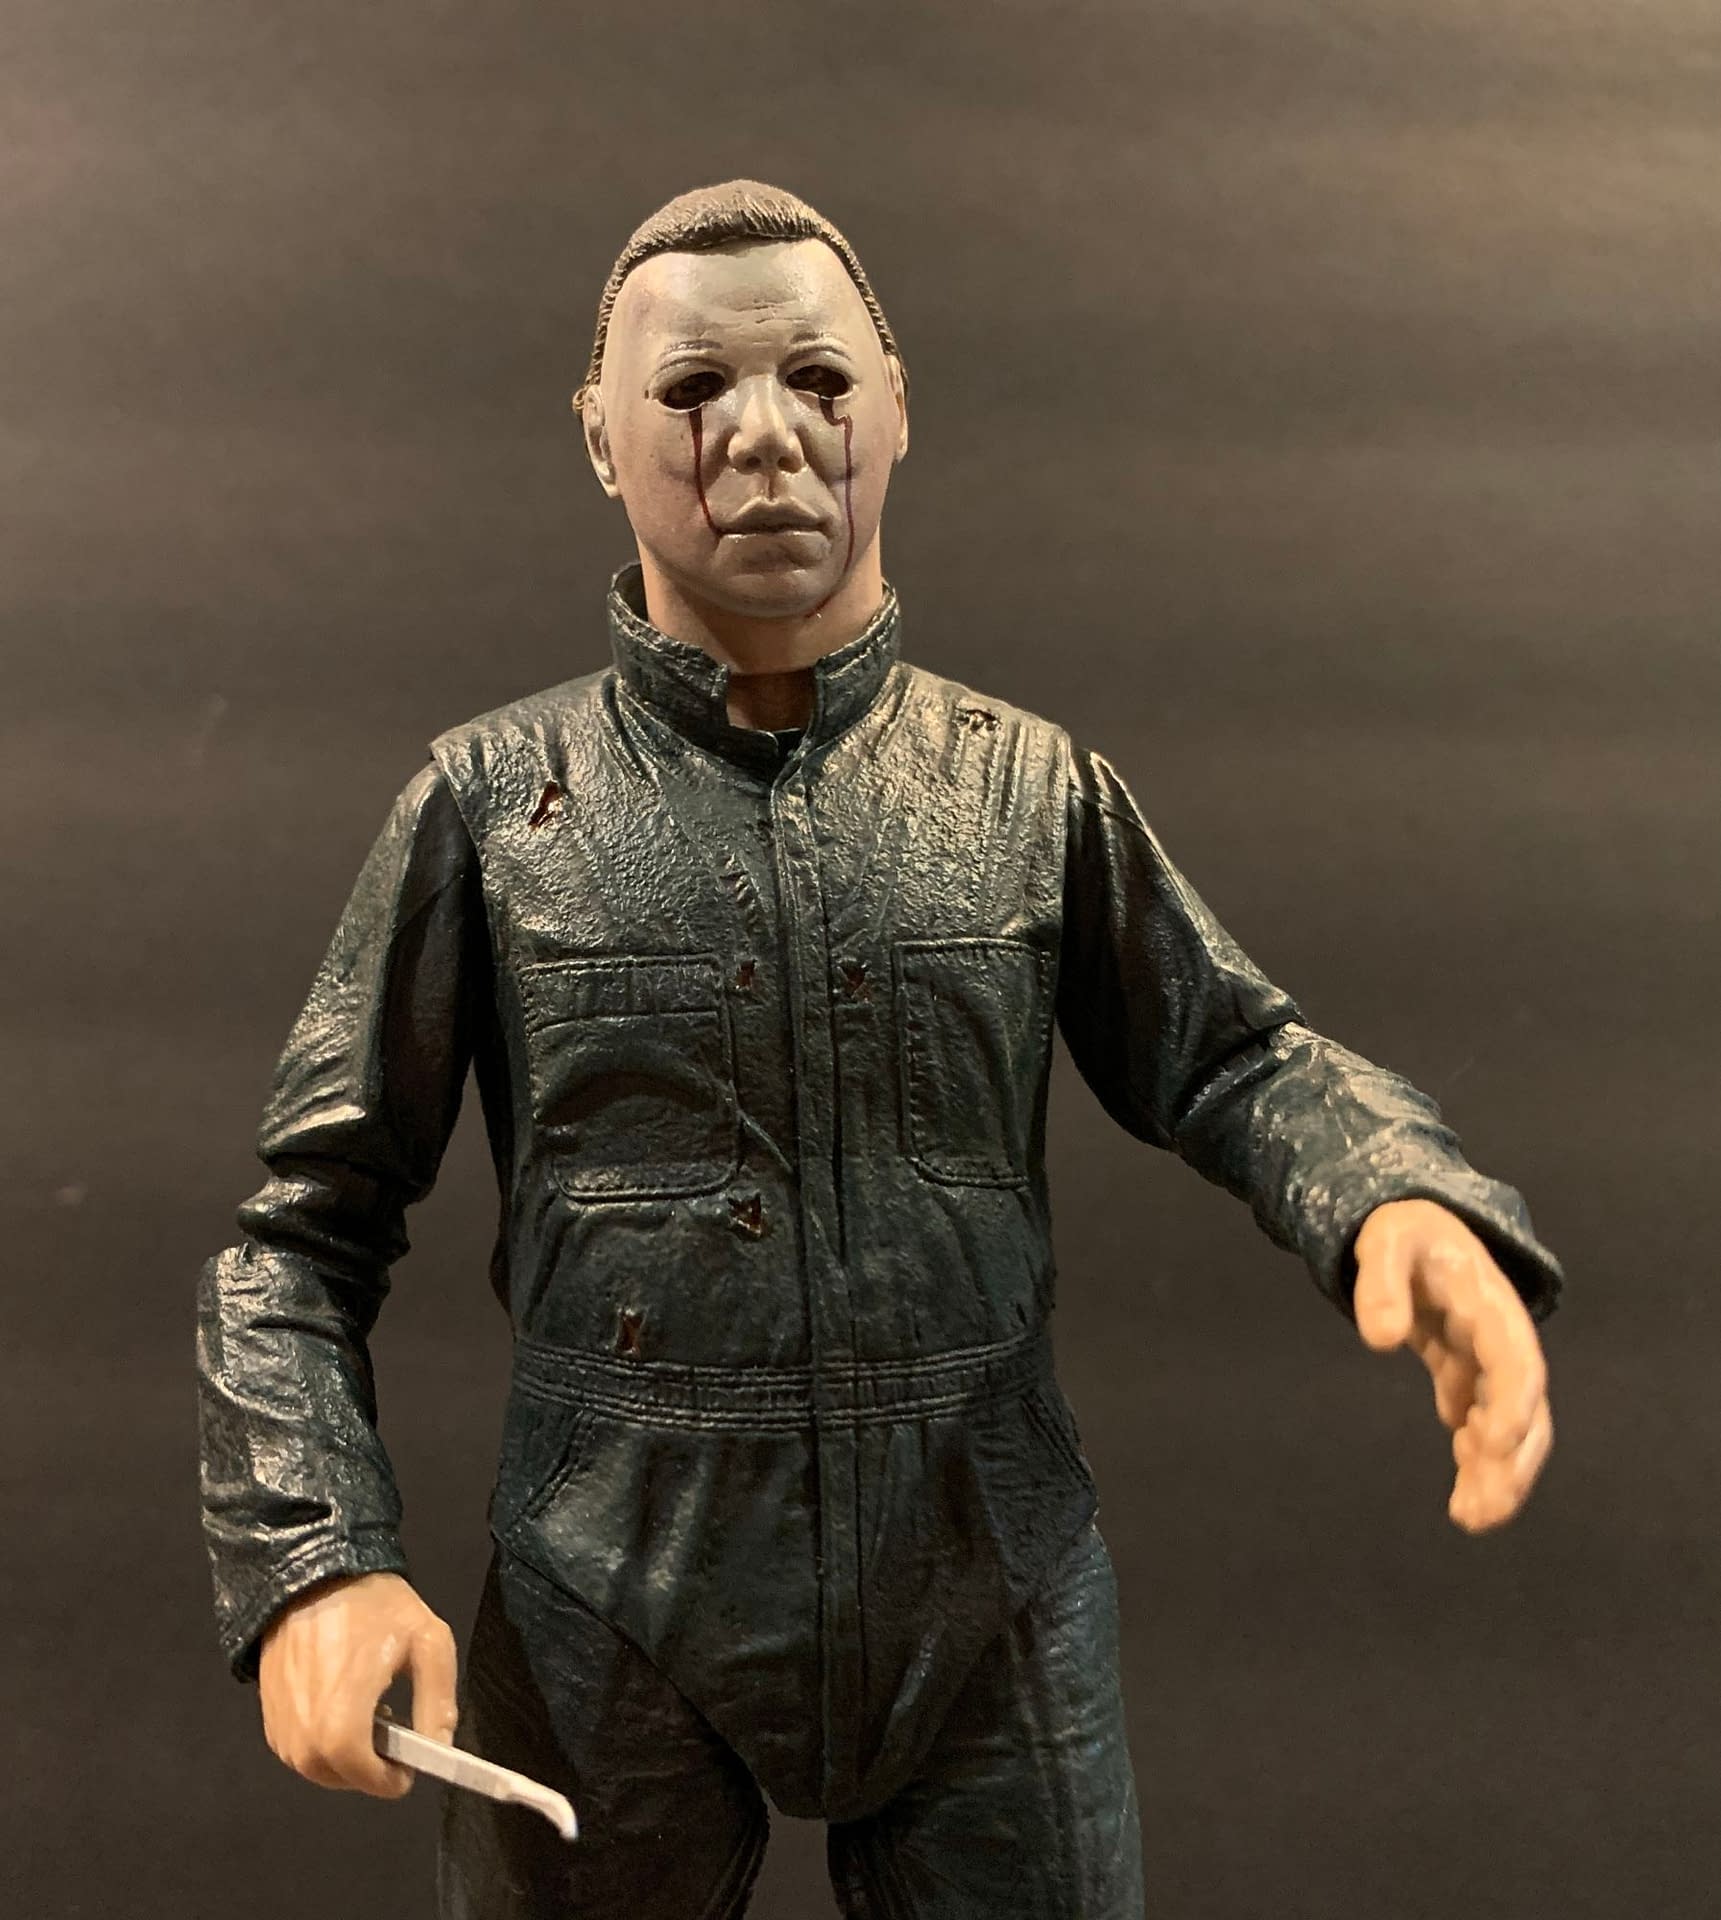 Halloween 2 Anniversary Pack Is One Of NECA's Finest Releases